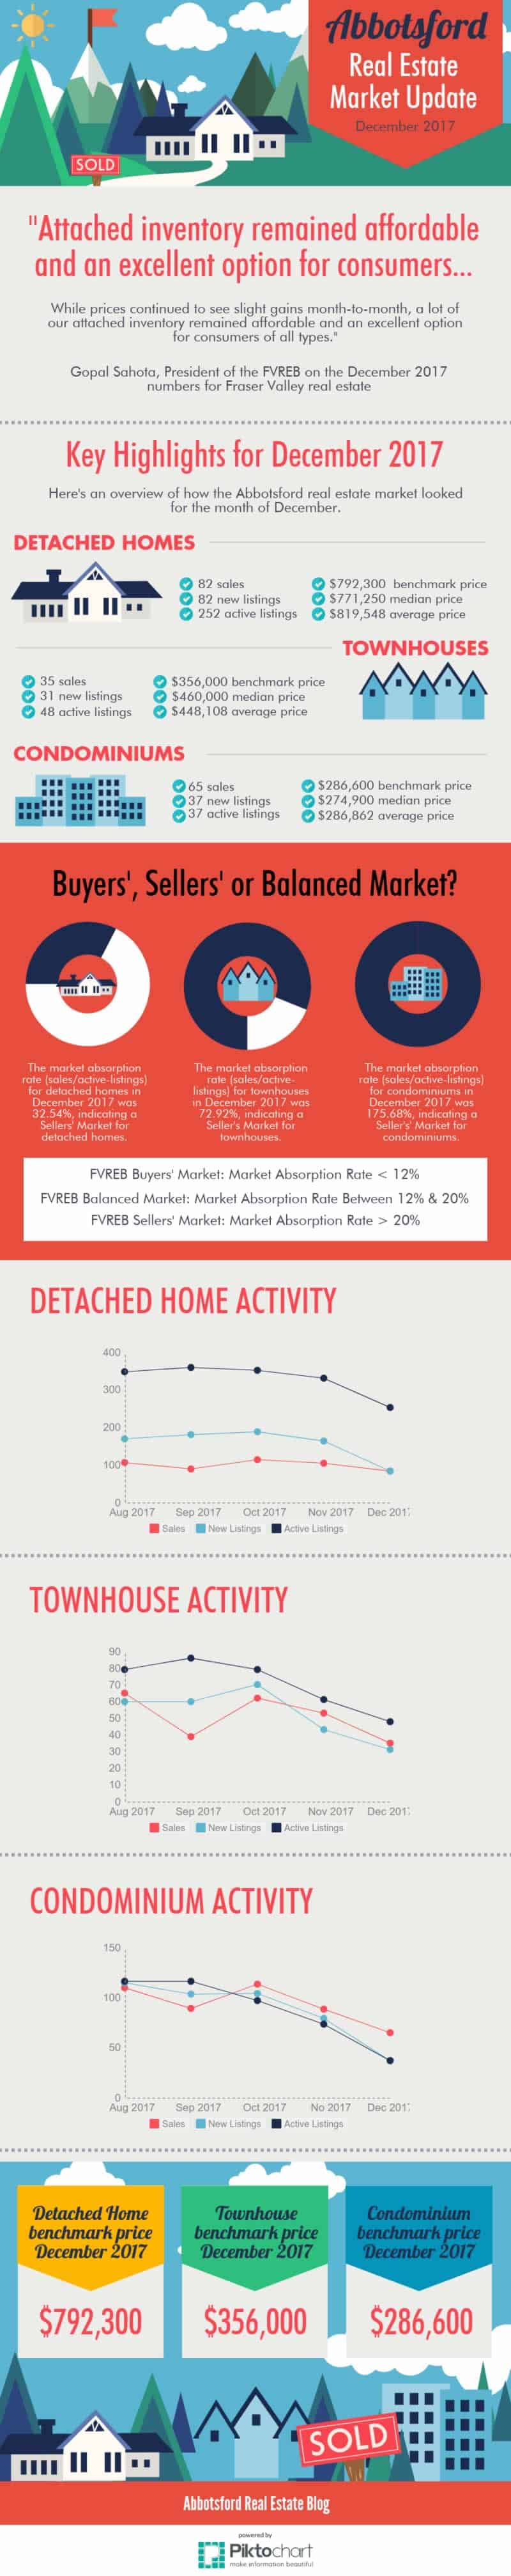 Abbotsford Townhouse Market Update December 2017 Infographic